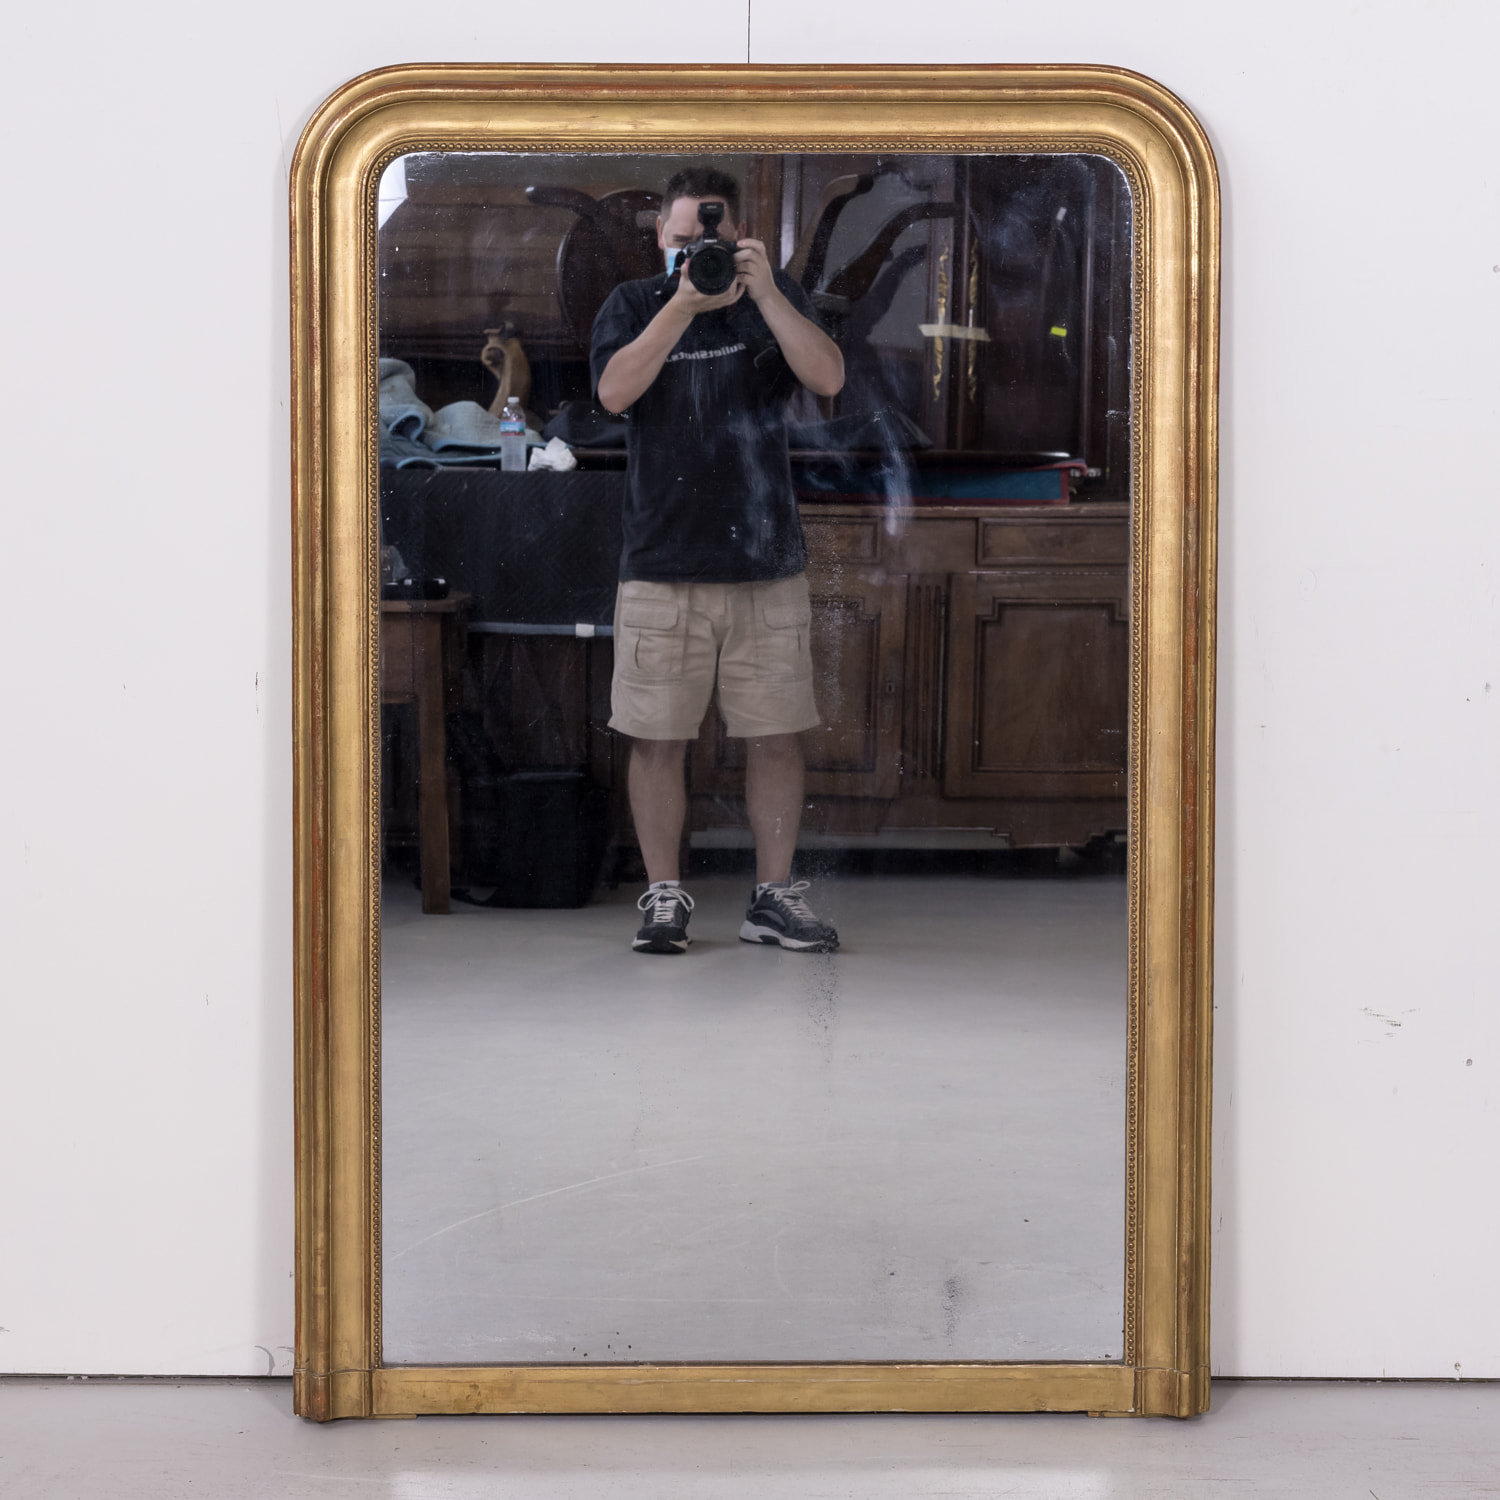 Louis Philippe Style Gilt Mirror, France 20th Century - 2 Available — South  Loop Loft